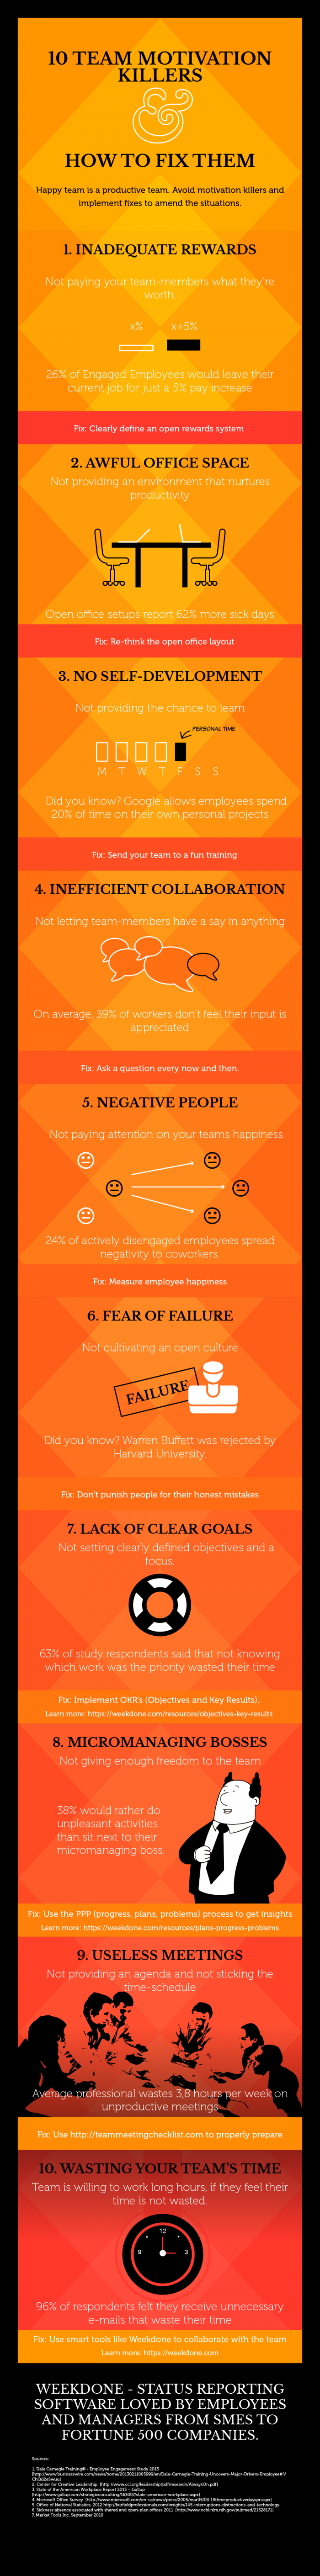 10 team motivation killers and how to fix them